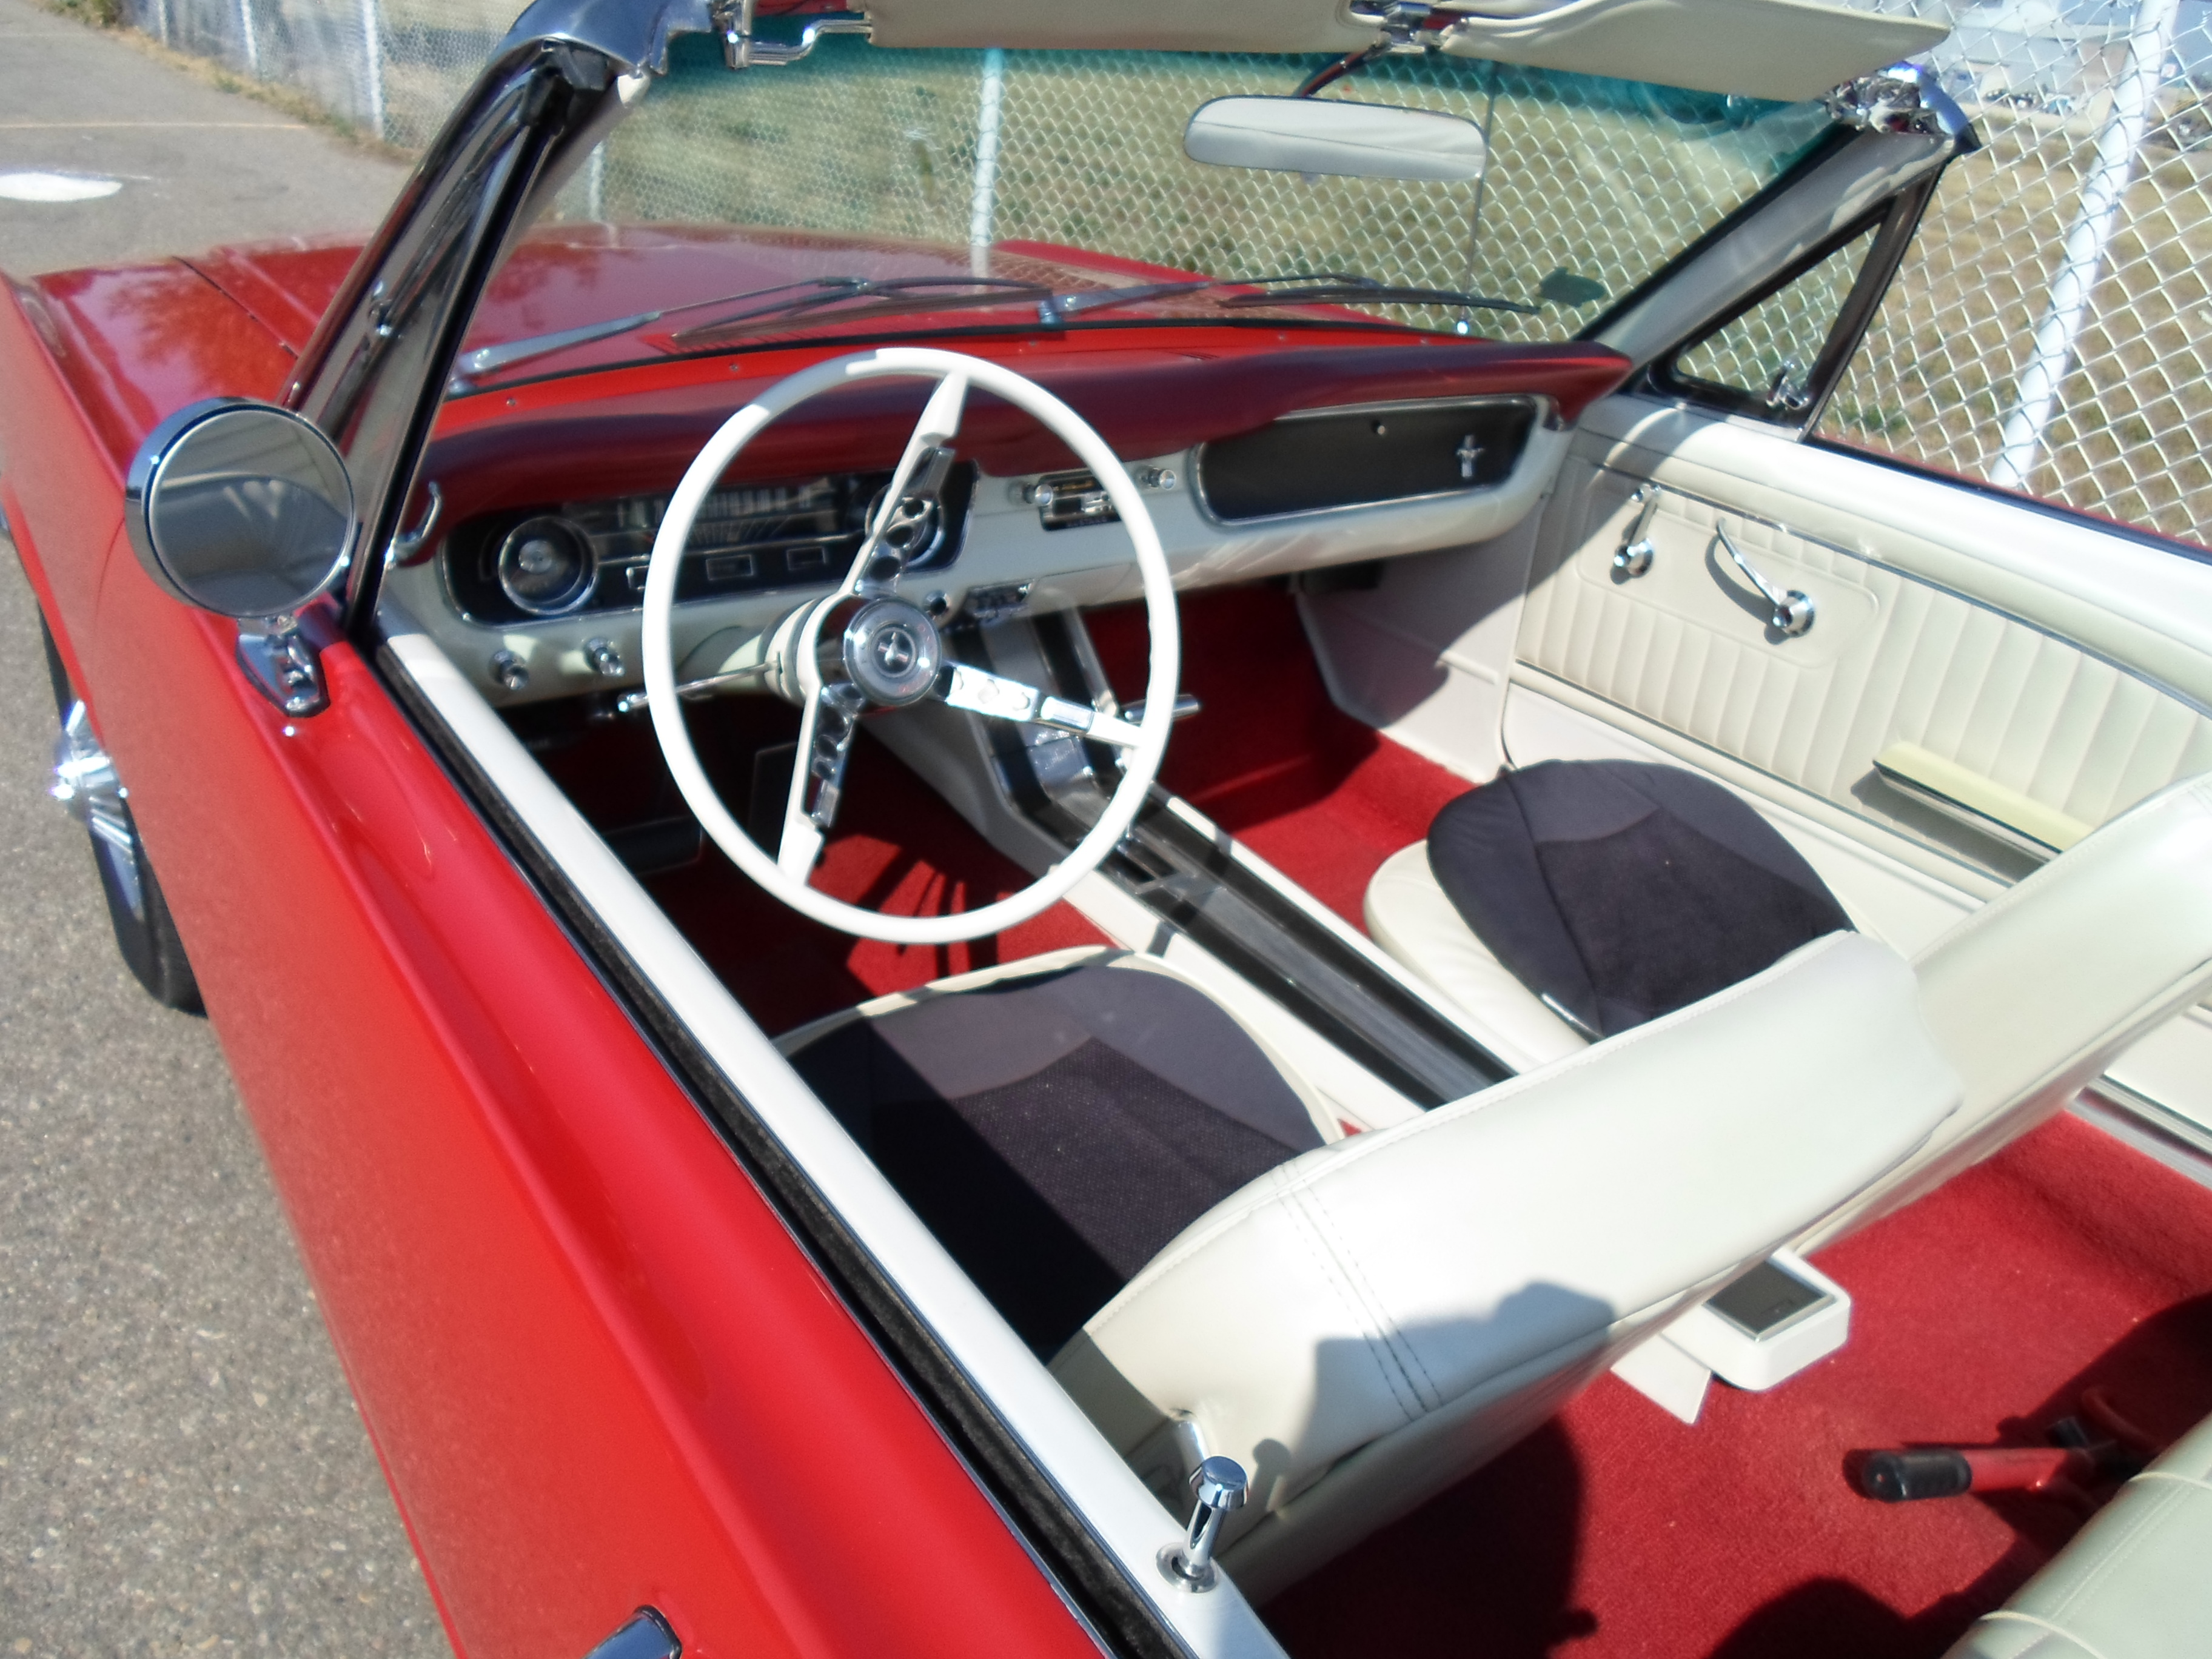 File:1964 1-2 Ford Mustang Convertible - interior (7978357142).jpg -  Wikimedia Commons